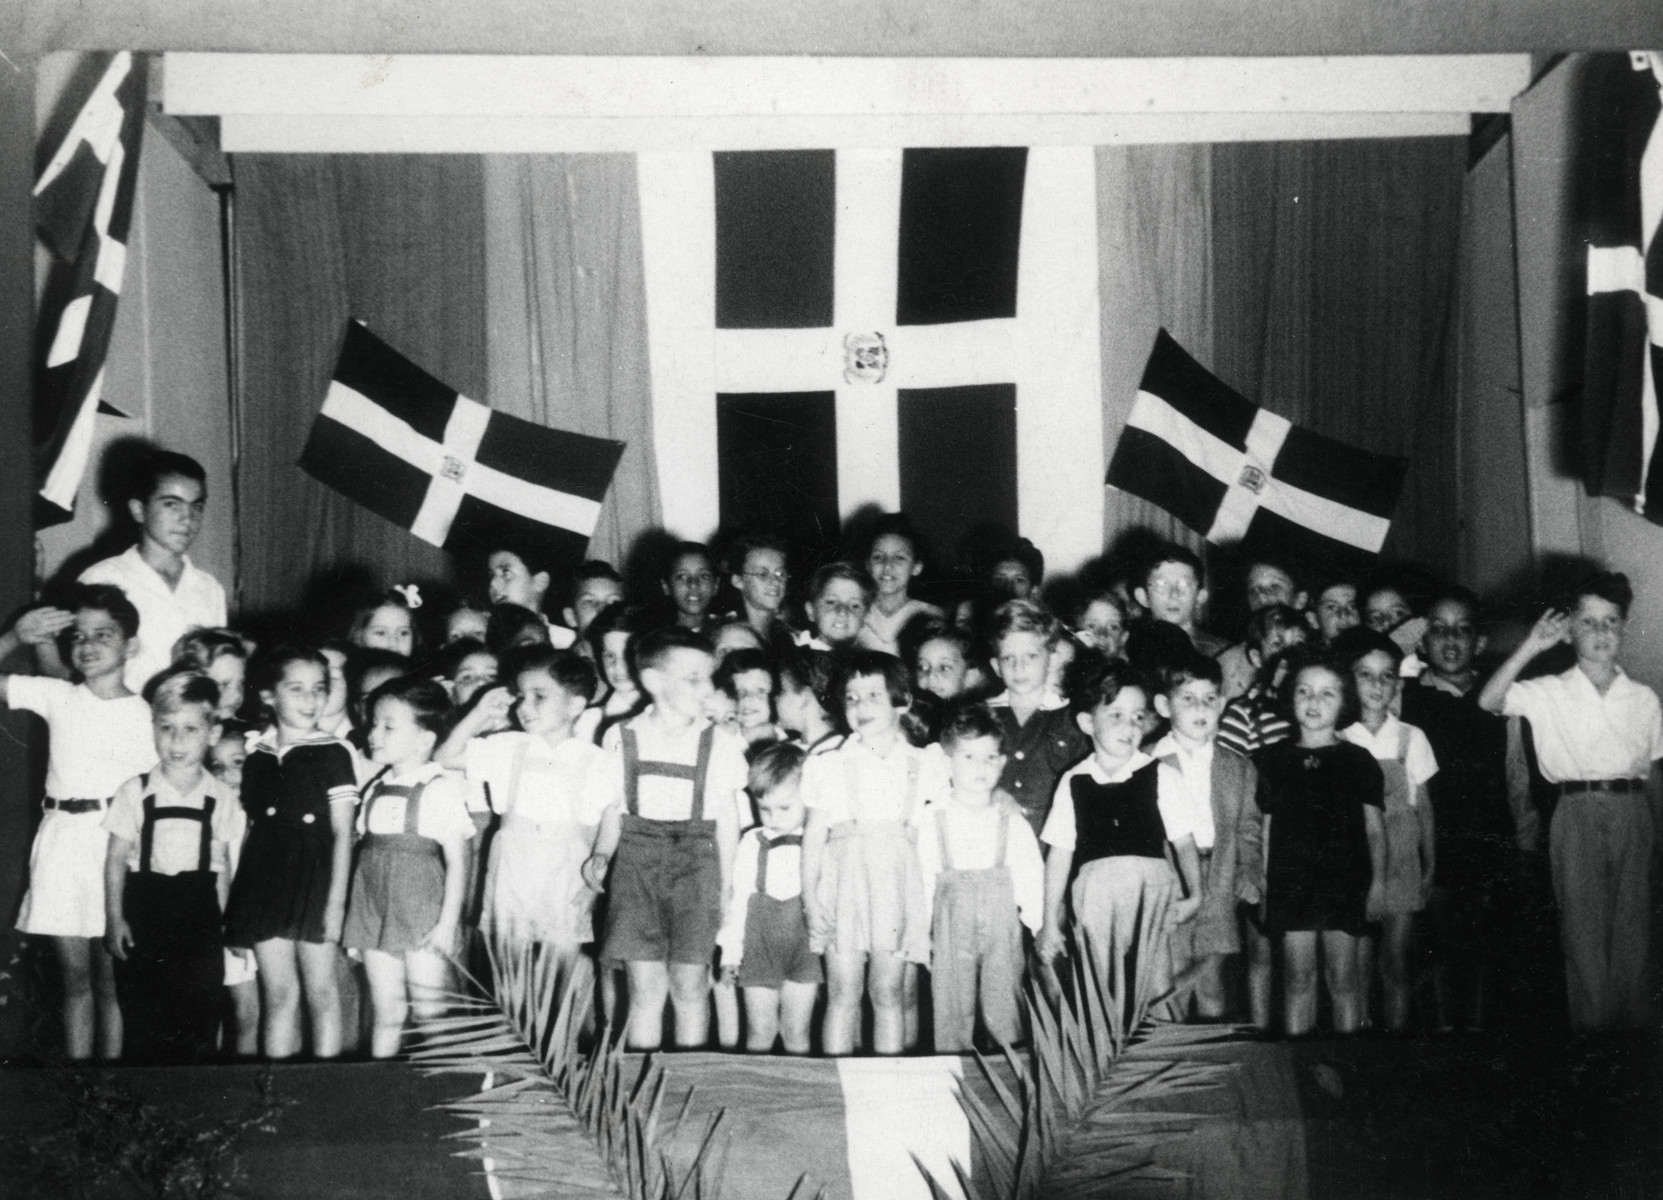 Young children stand in front of Dominican flags at a ceremony in their school in Sosua.  

Teenager Marcel Salomon stands behind them on the left.